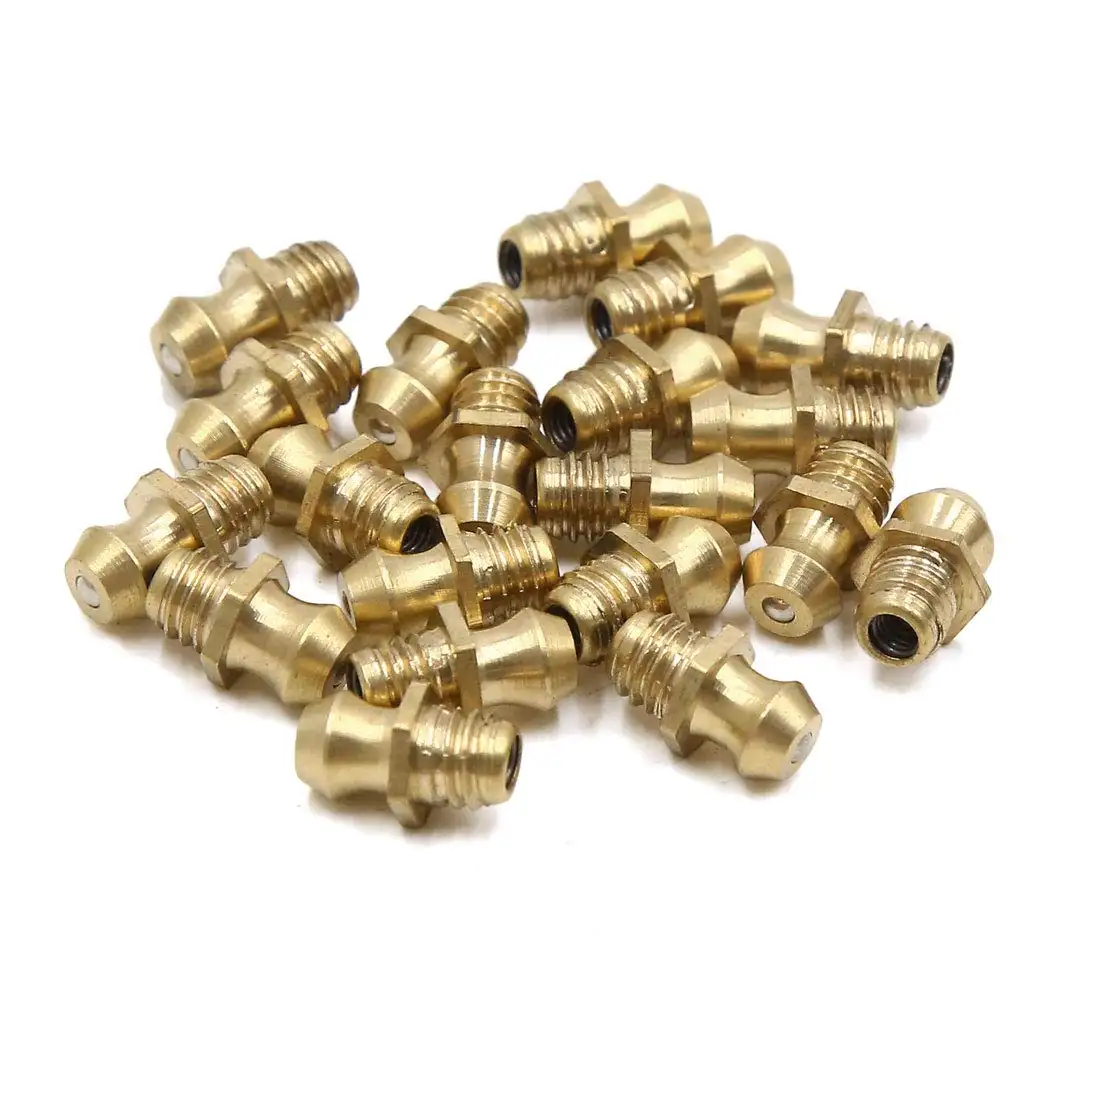 M6 Thread 1mm Pitch Brass Straight 45 Degree 90 Degree Grease Nipple Fitting for Motorcycle Car